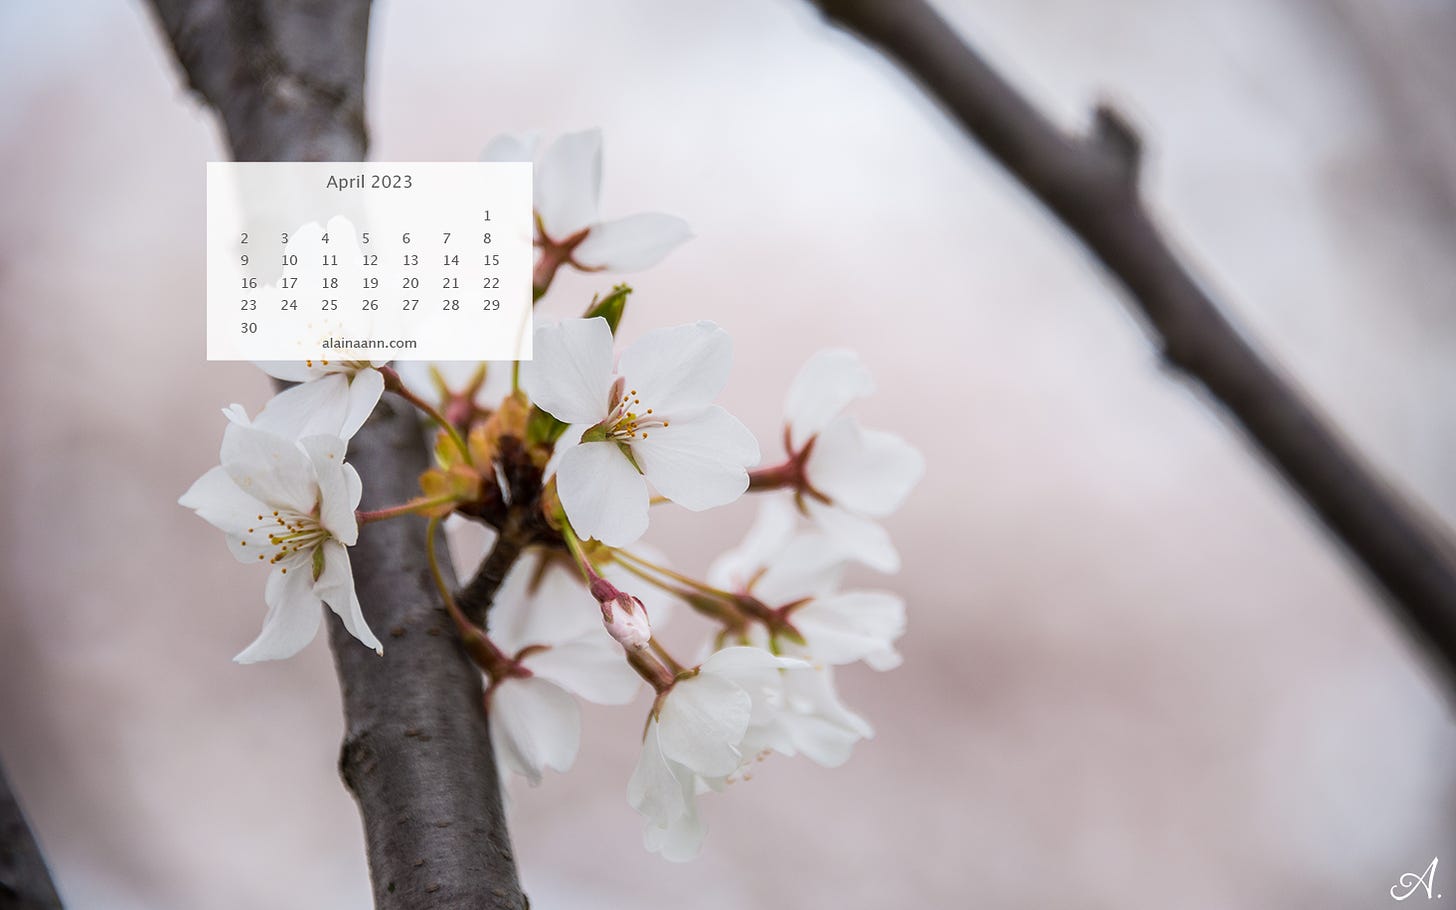 April calendar overlayed on a photo of cherry blossoms.